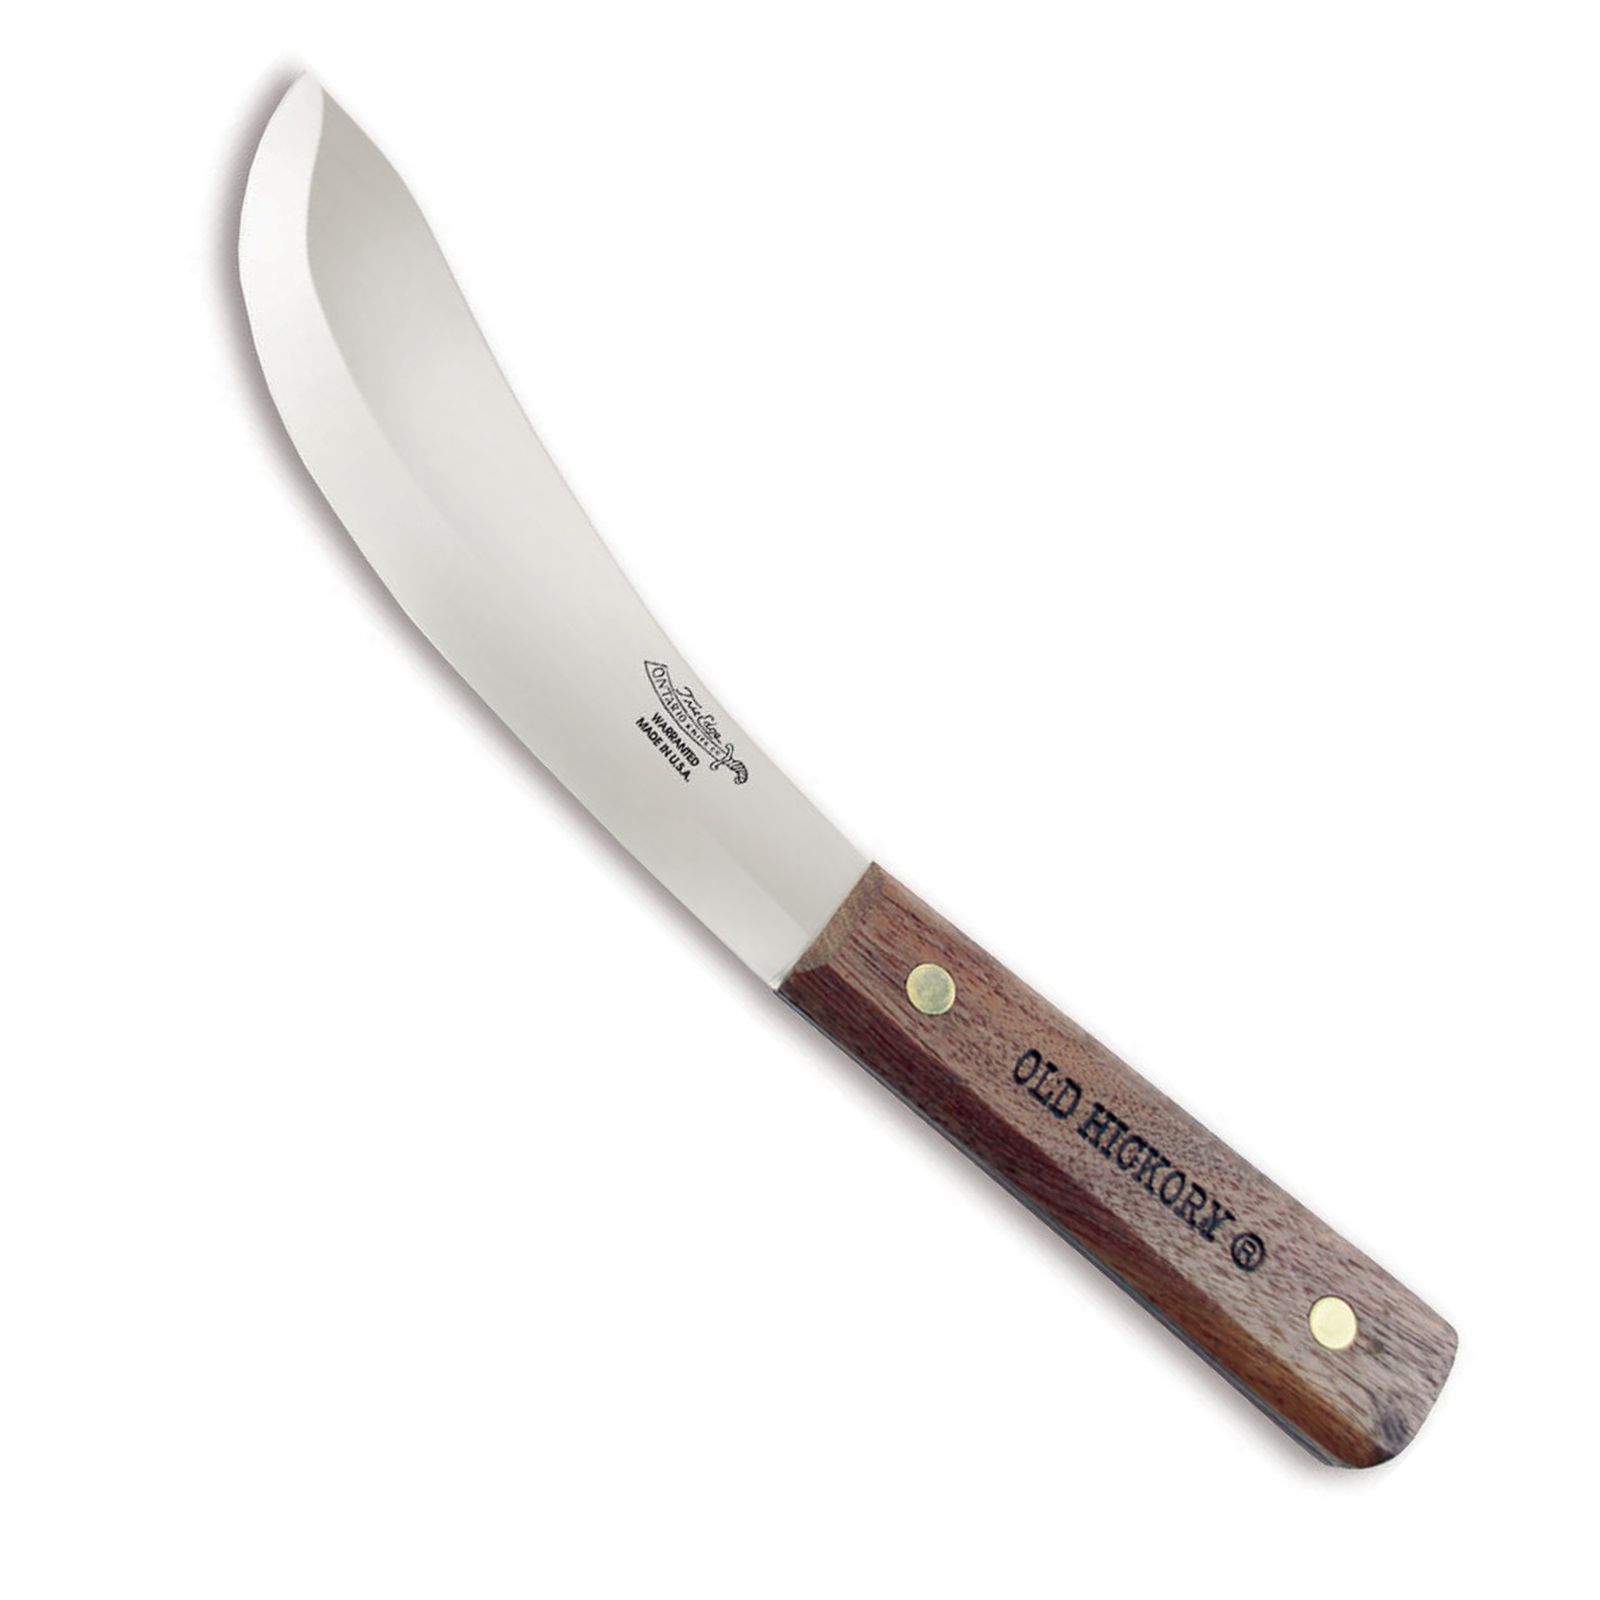 Ontario Knife Co. Old Hickory 7150 15cm Satin 1075 Carbon Steel ...